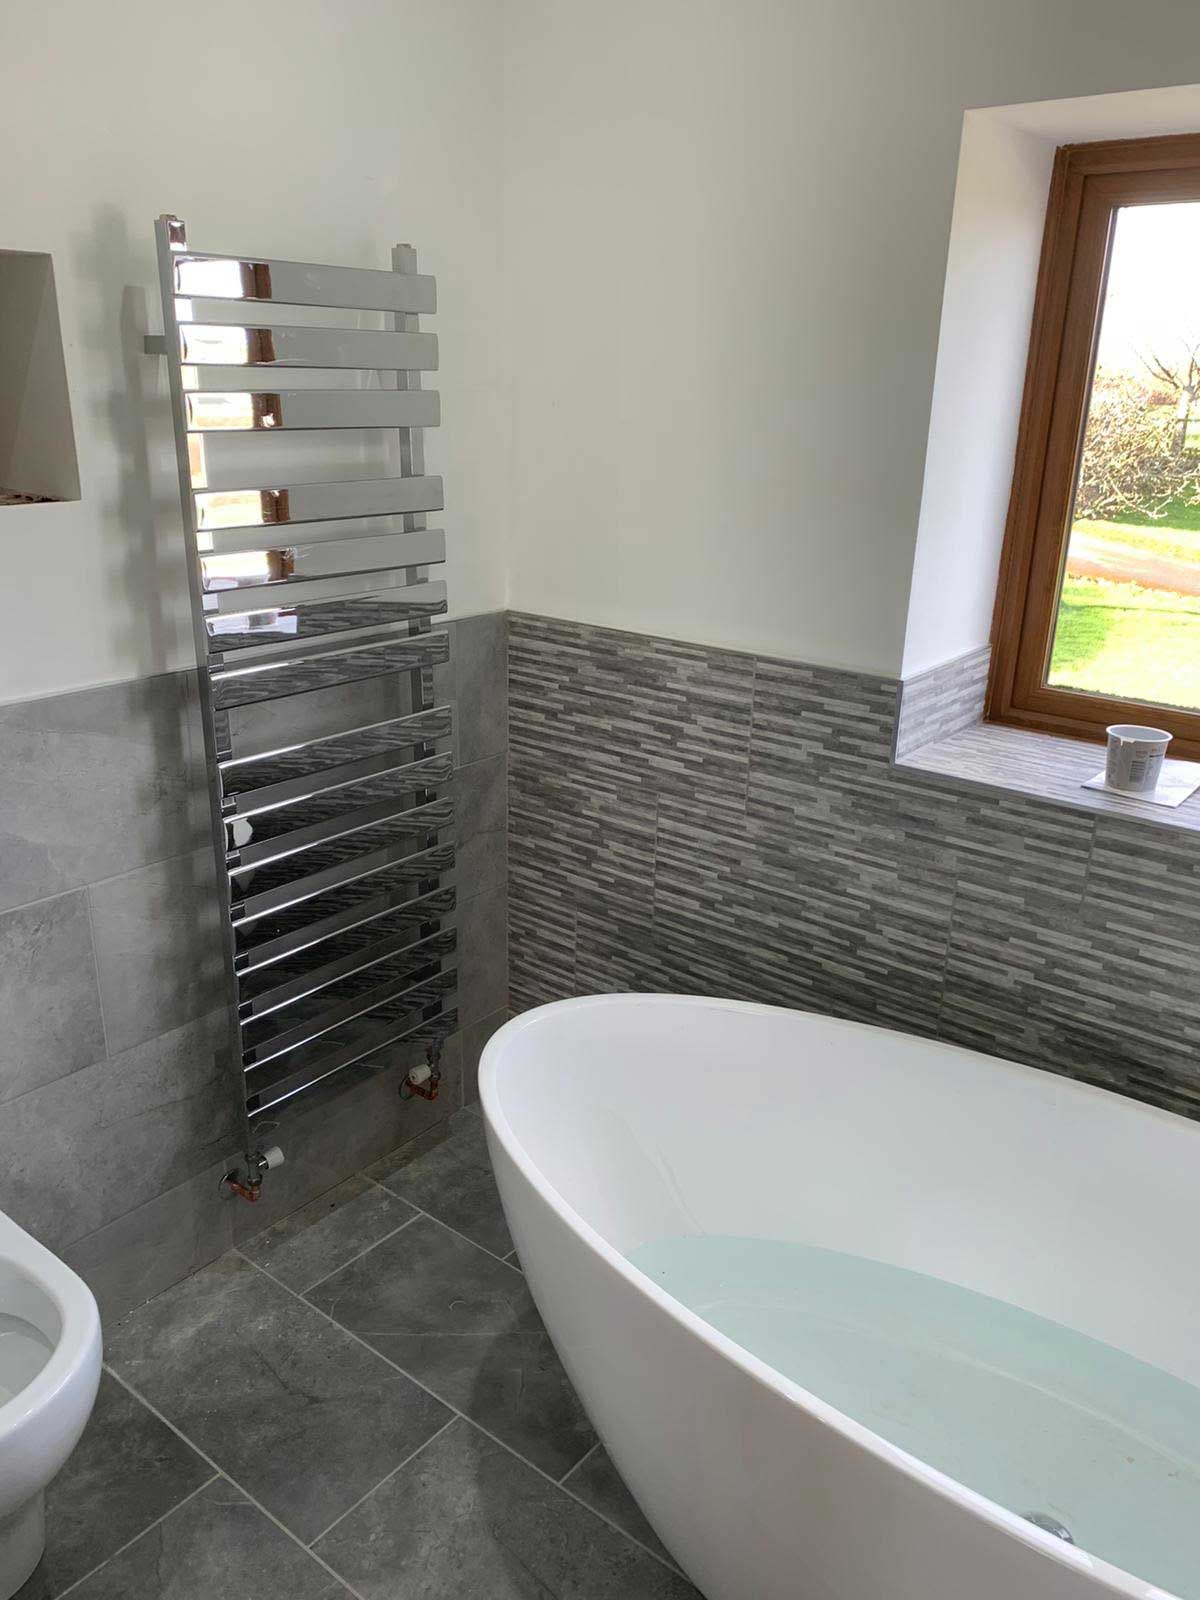 Completed new bathroom in slate grey.